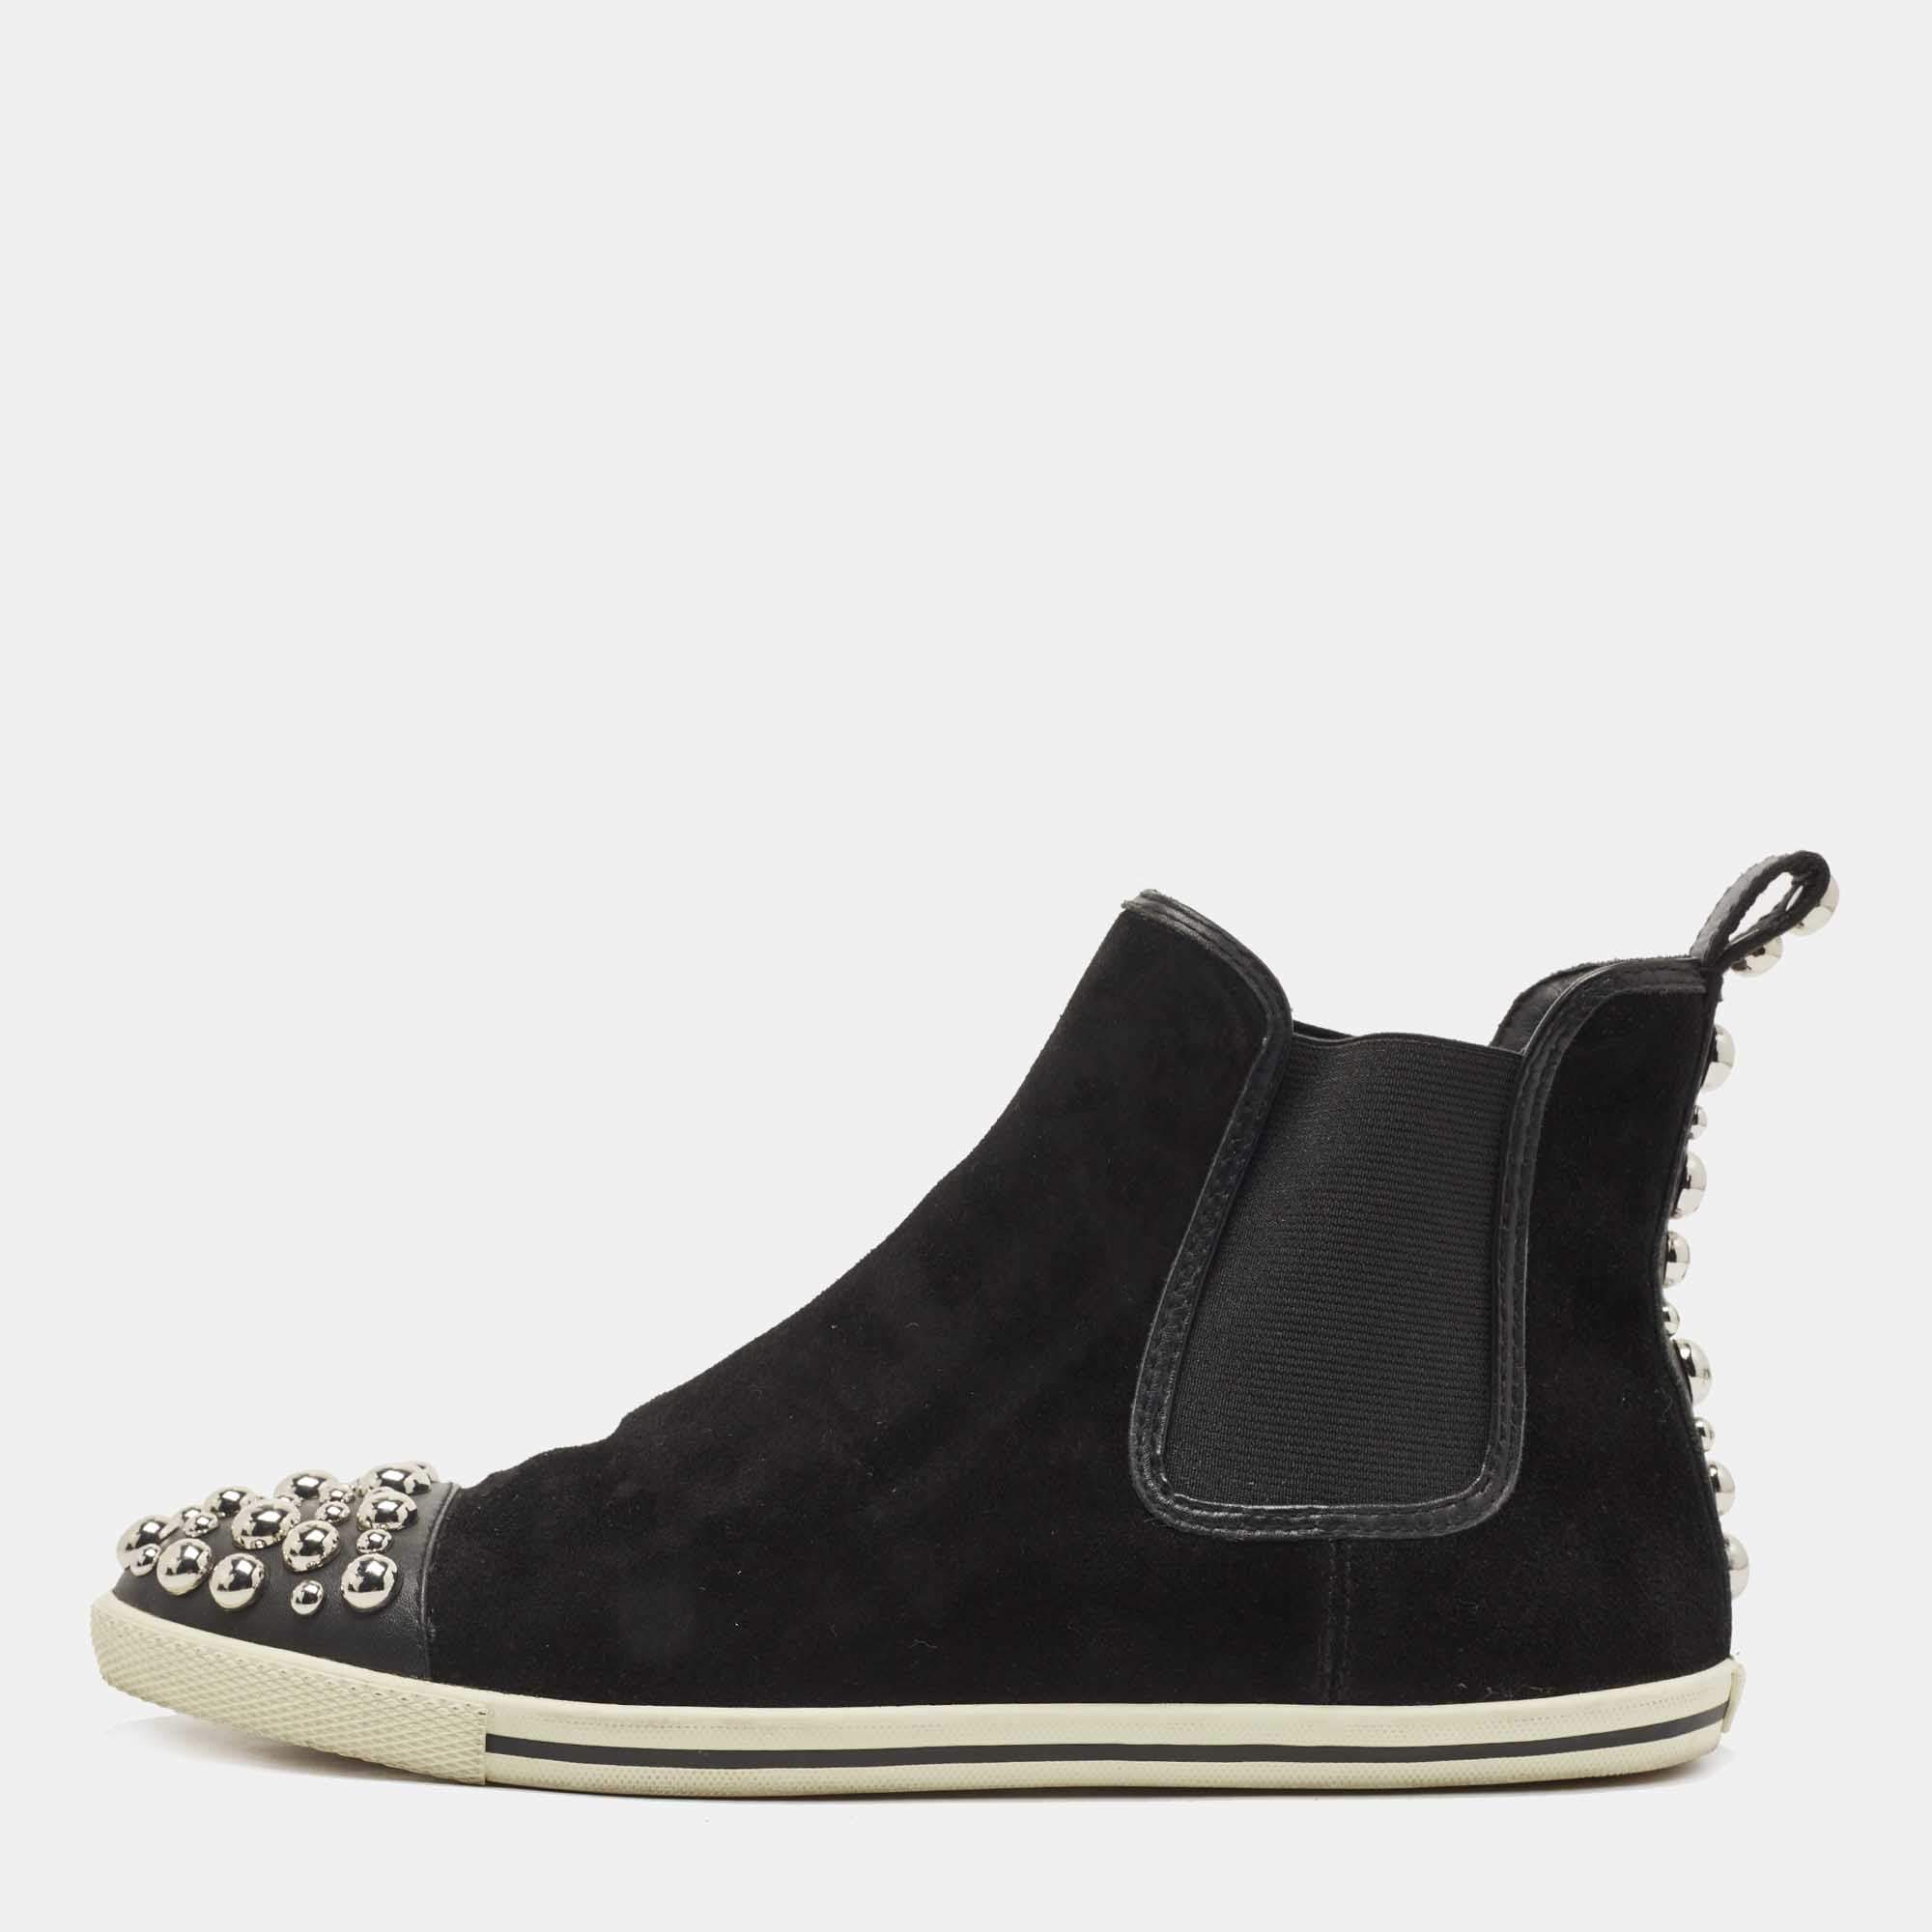 Marc by Marc Jacobs Marc Jacobs Gray Suede High Top Wedge Sneakers